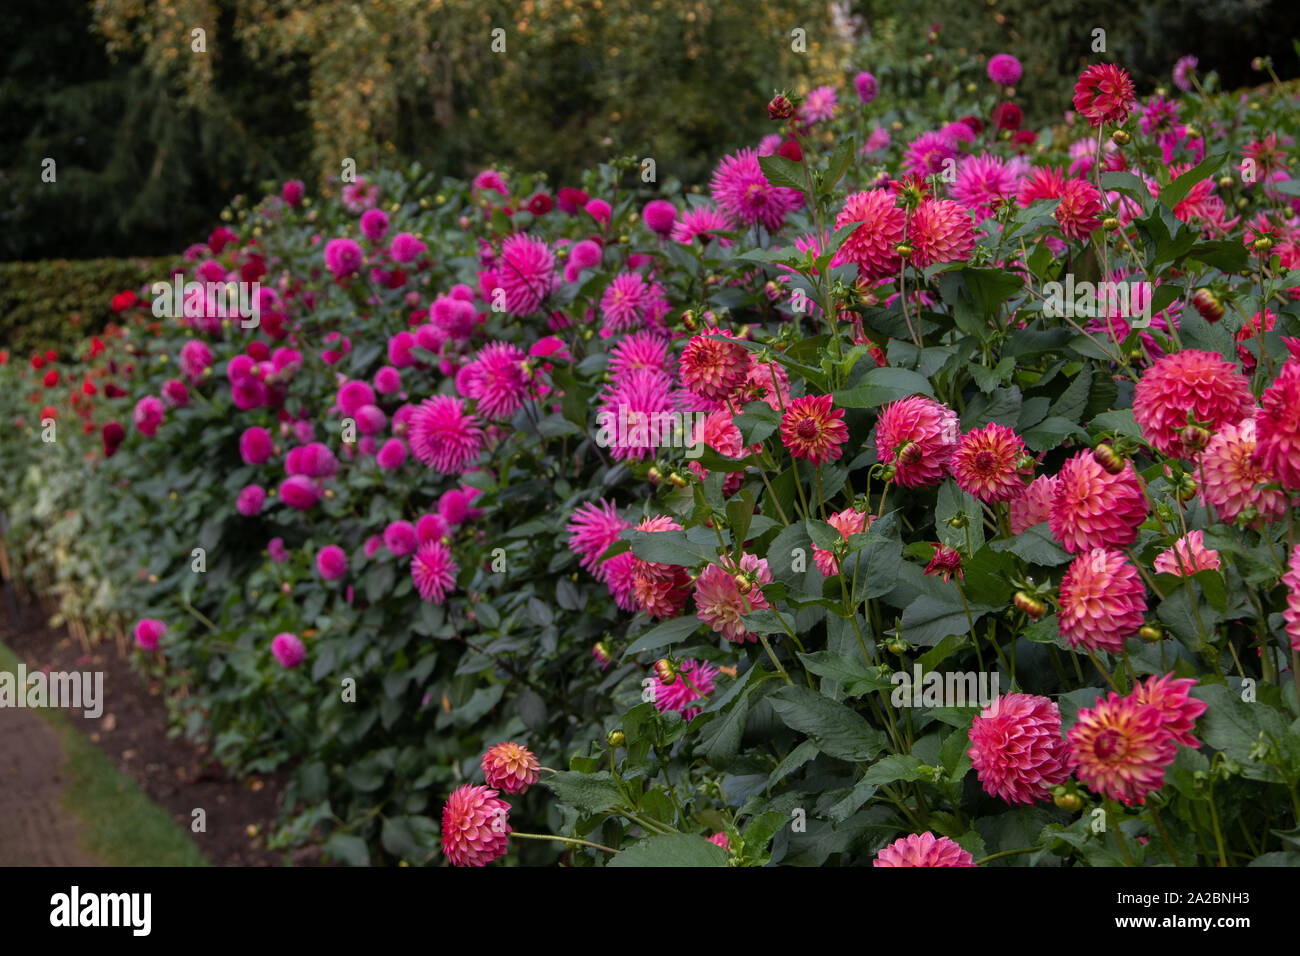 Bed of Red and Pink Dahlia Flowers Stock Photo